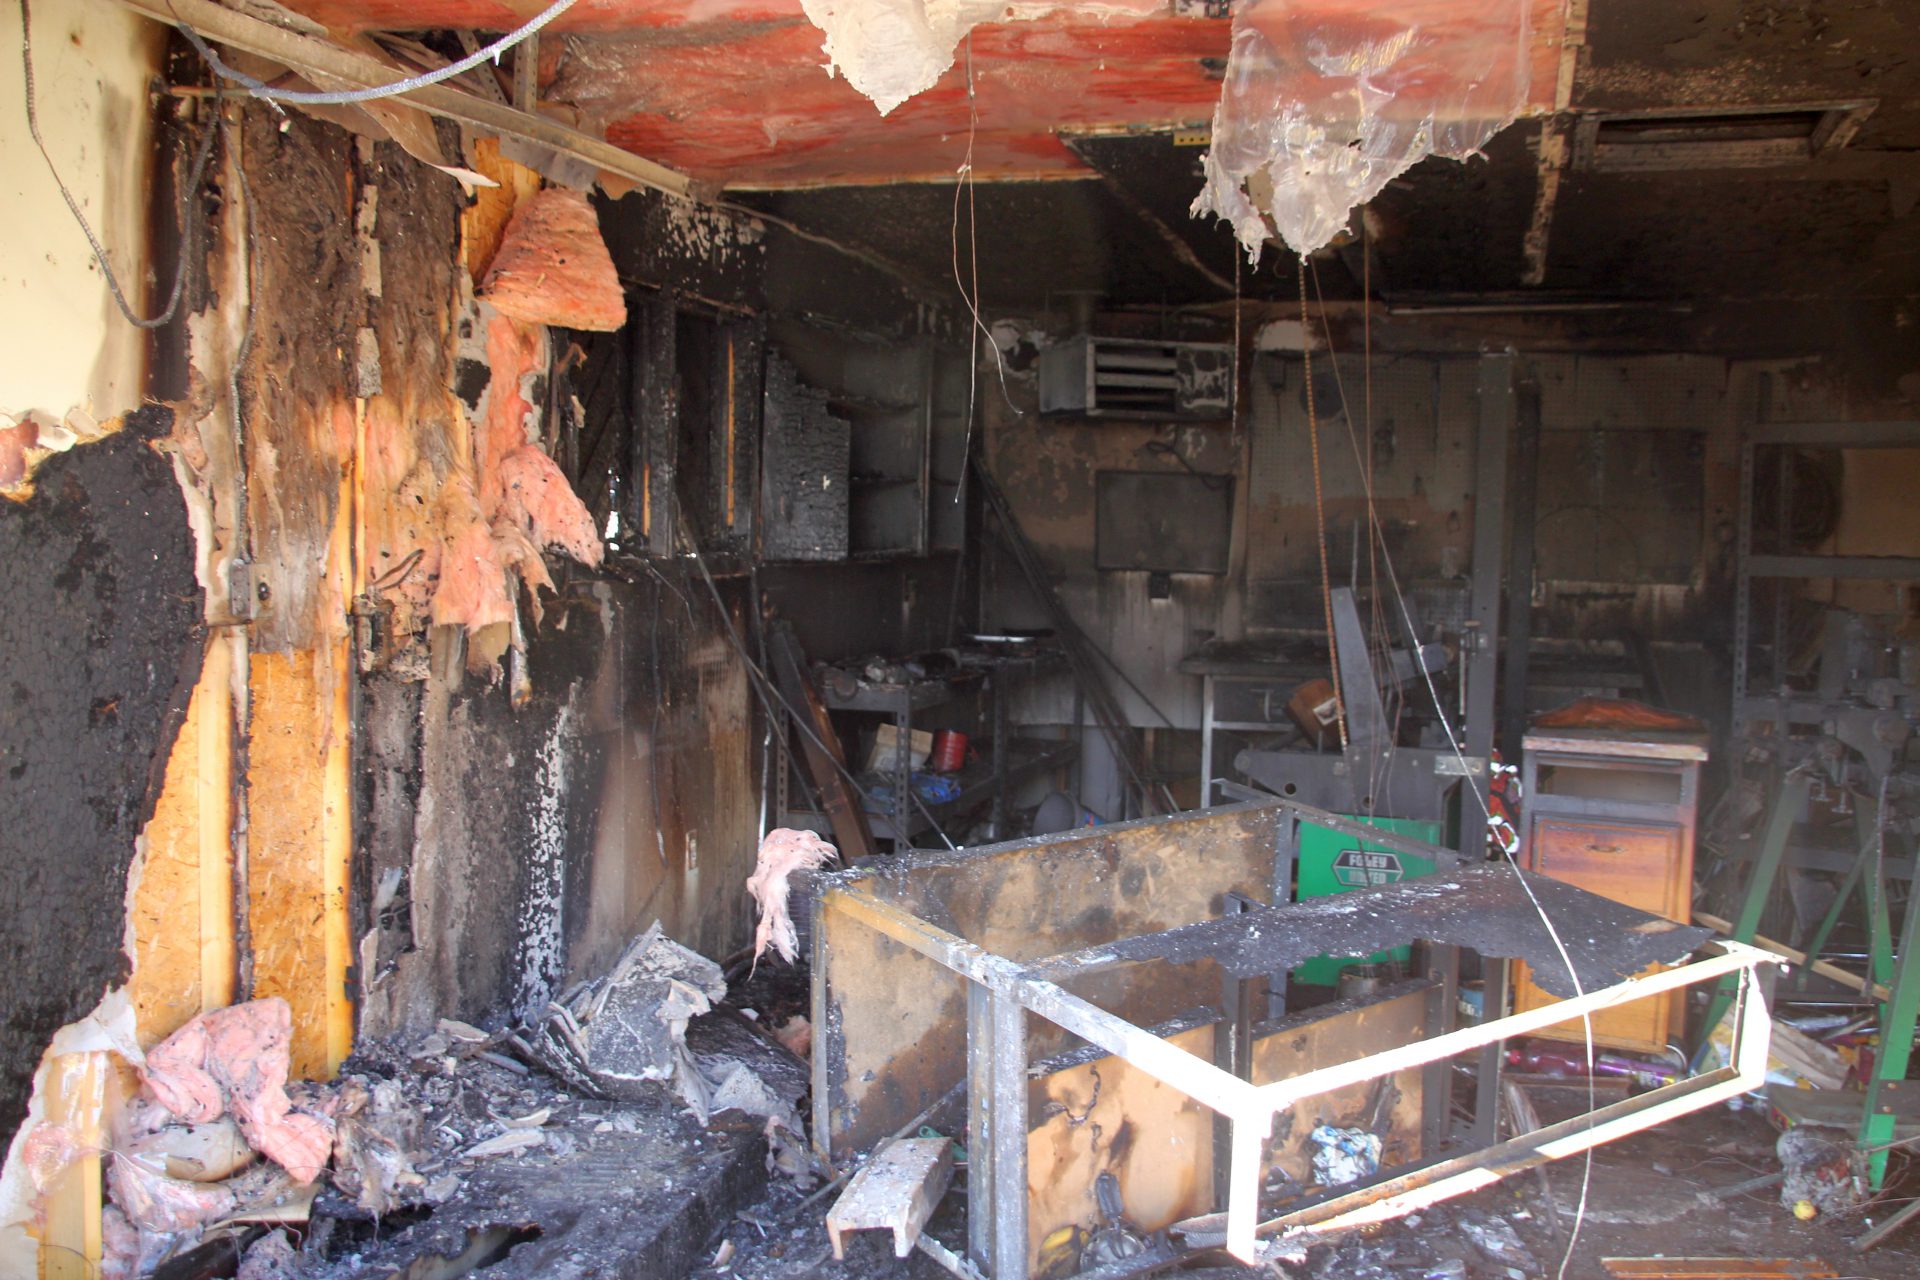 Future of Wee Links pro shop unknown after fire